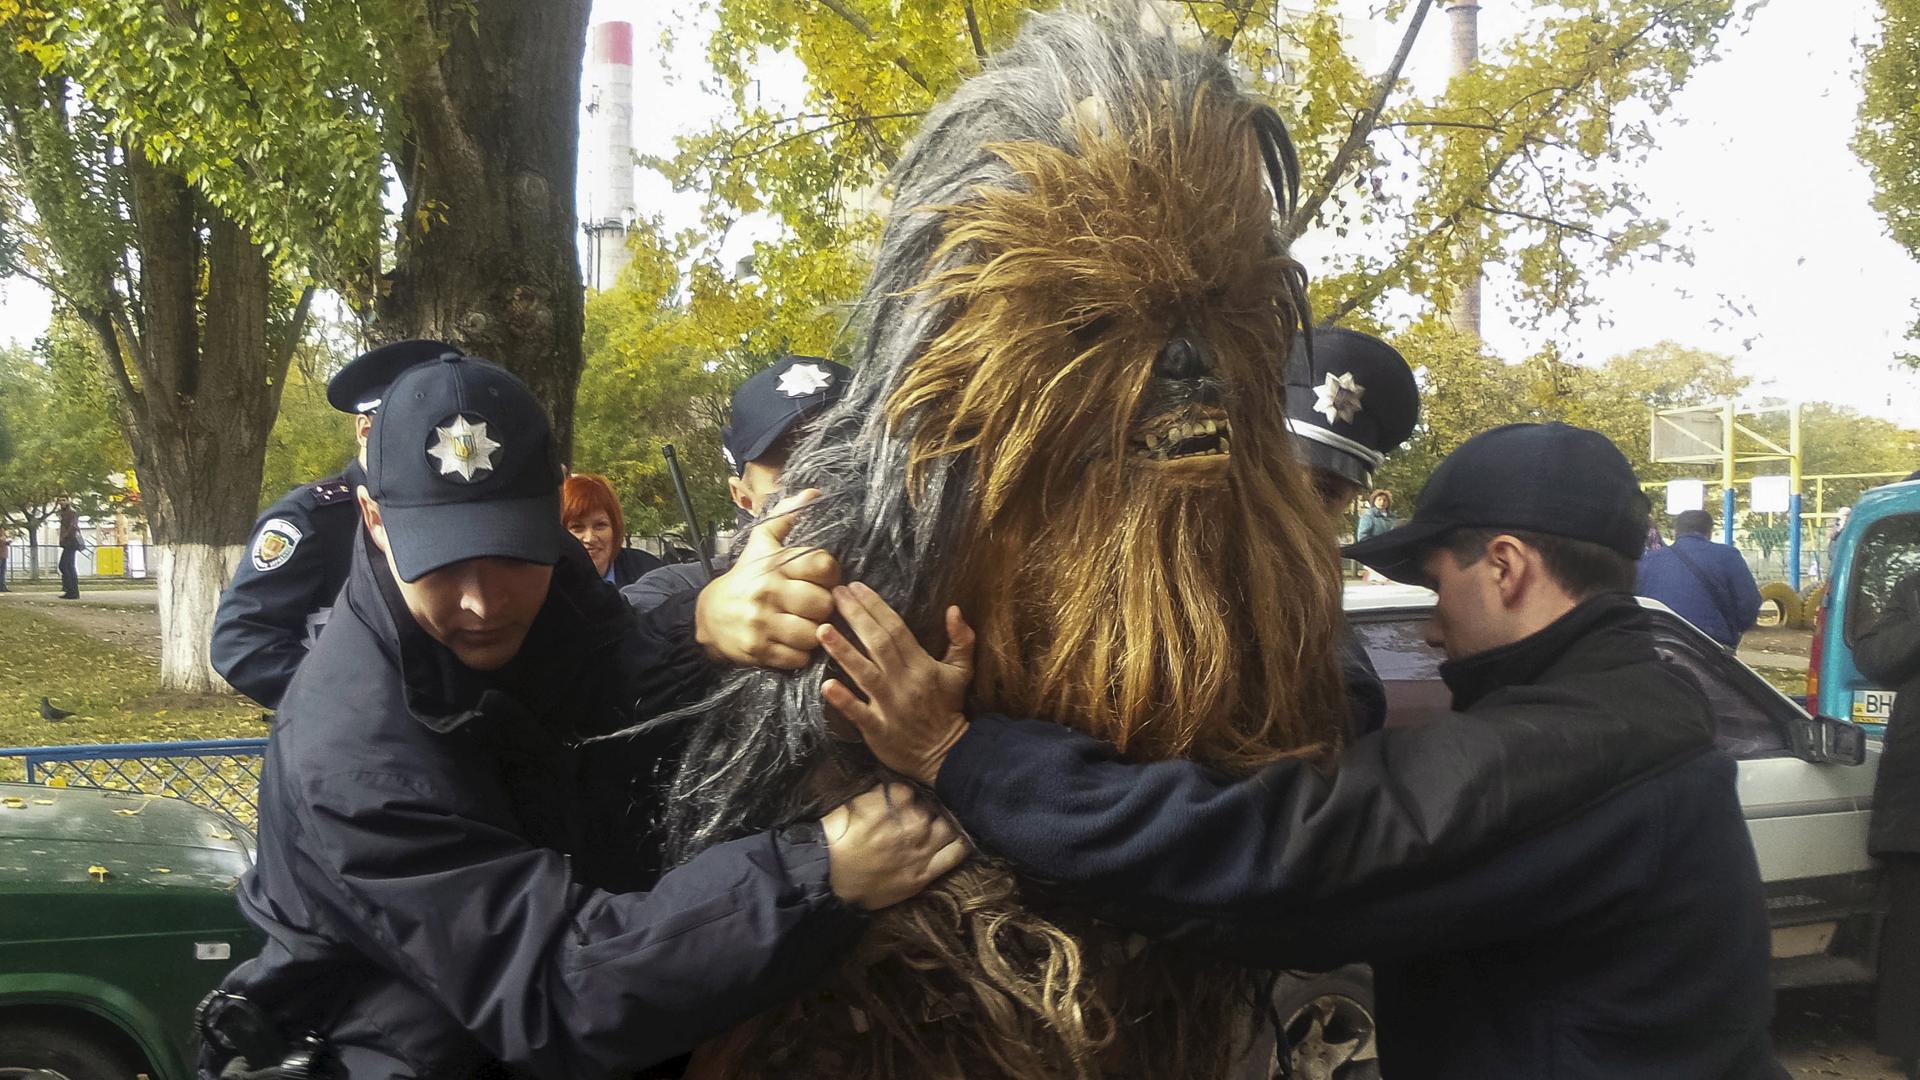 Policemen detain a person dressed as Star Wars character Chewbacca during a regional election near a polling station in Odessa, Ukraine, October 25, 2015.